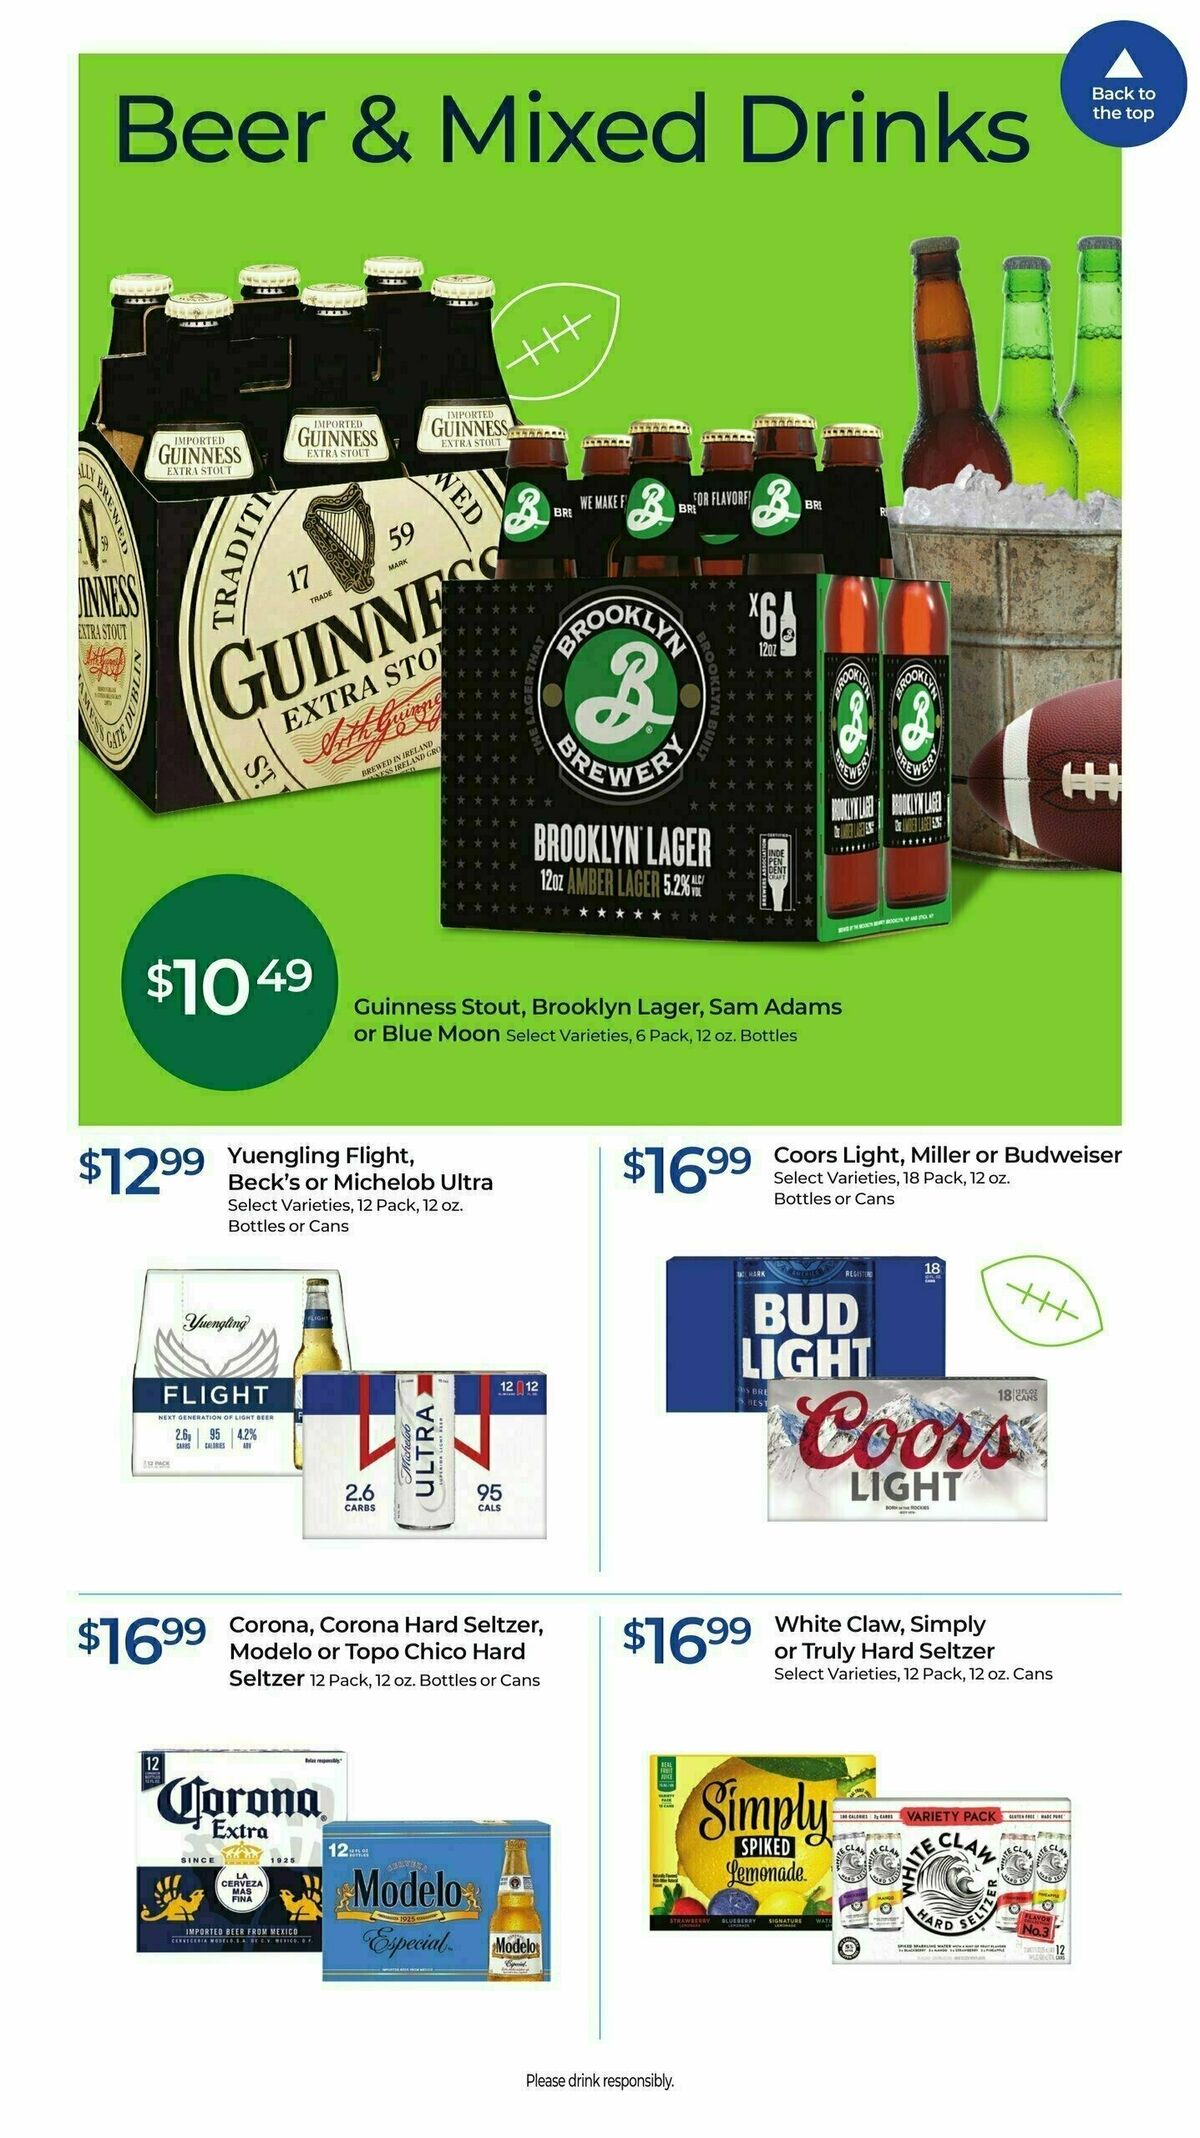 Rite Aid Weekly Ad from January 21